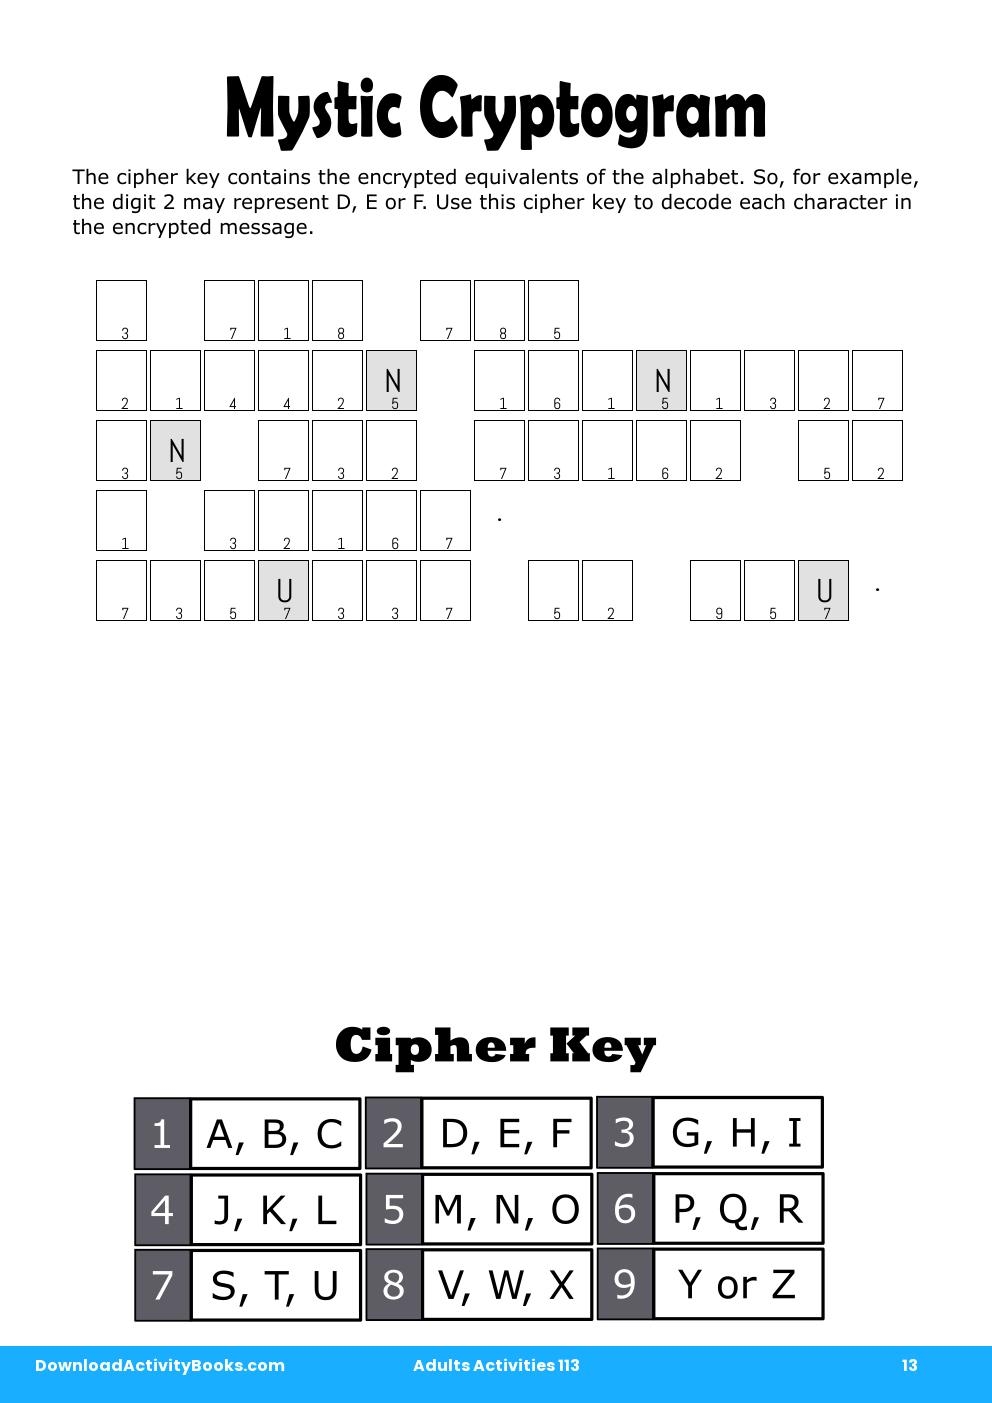 Mystic Cryptogram in Adults Activities 113